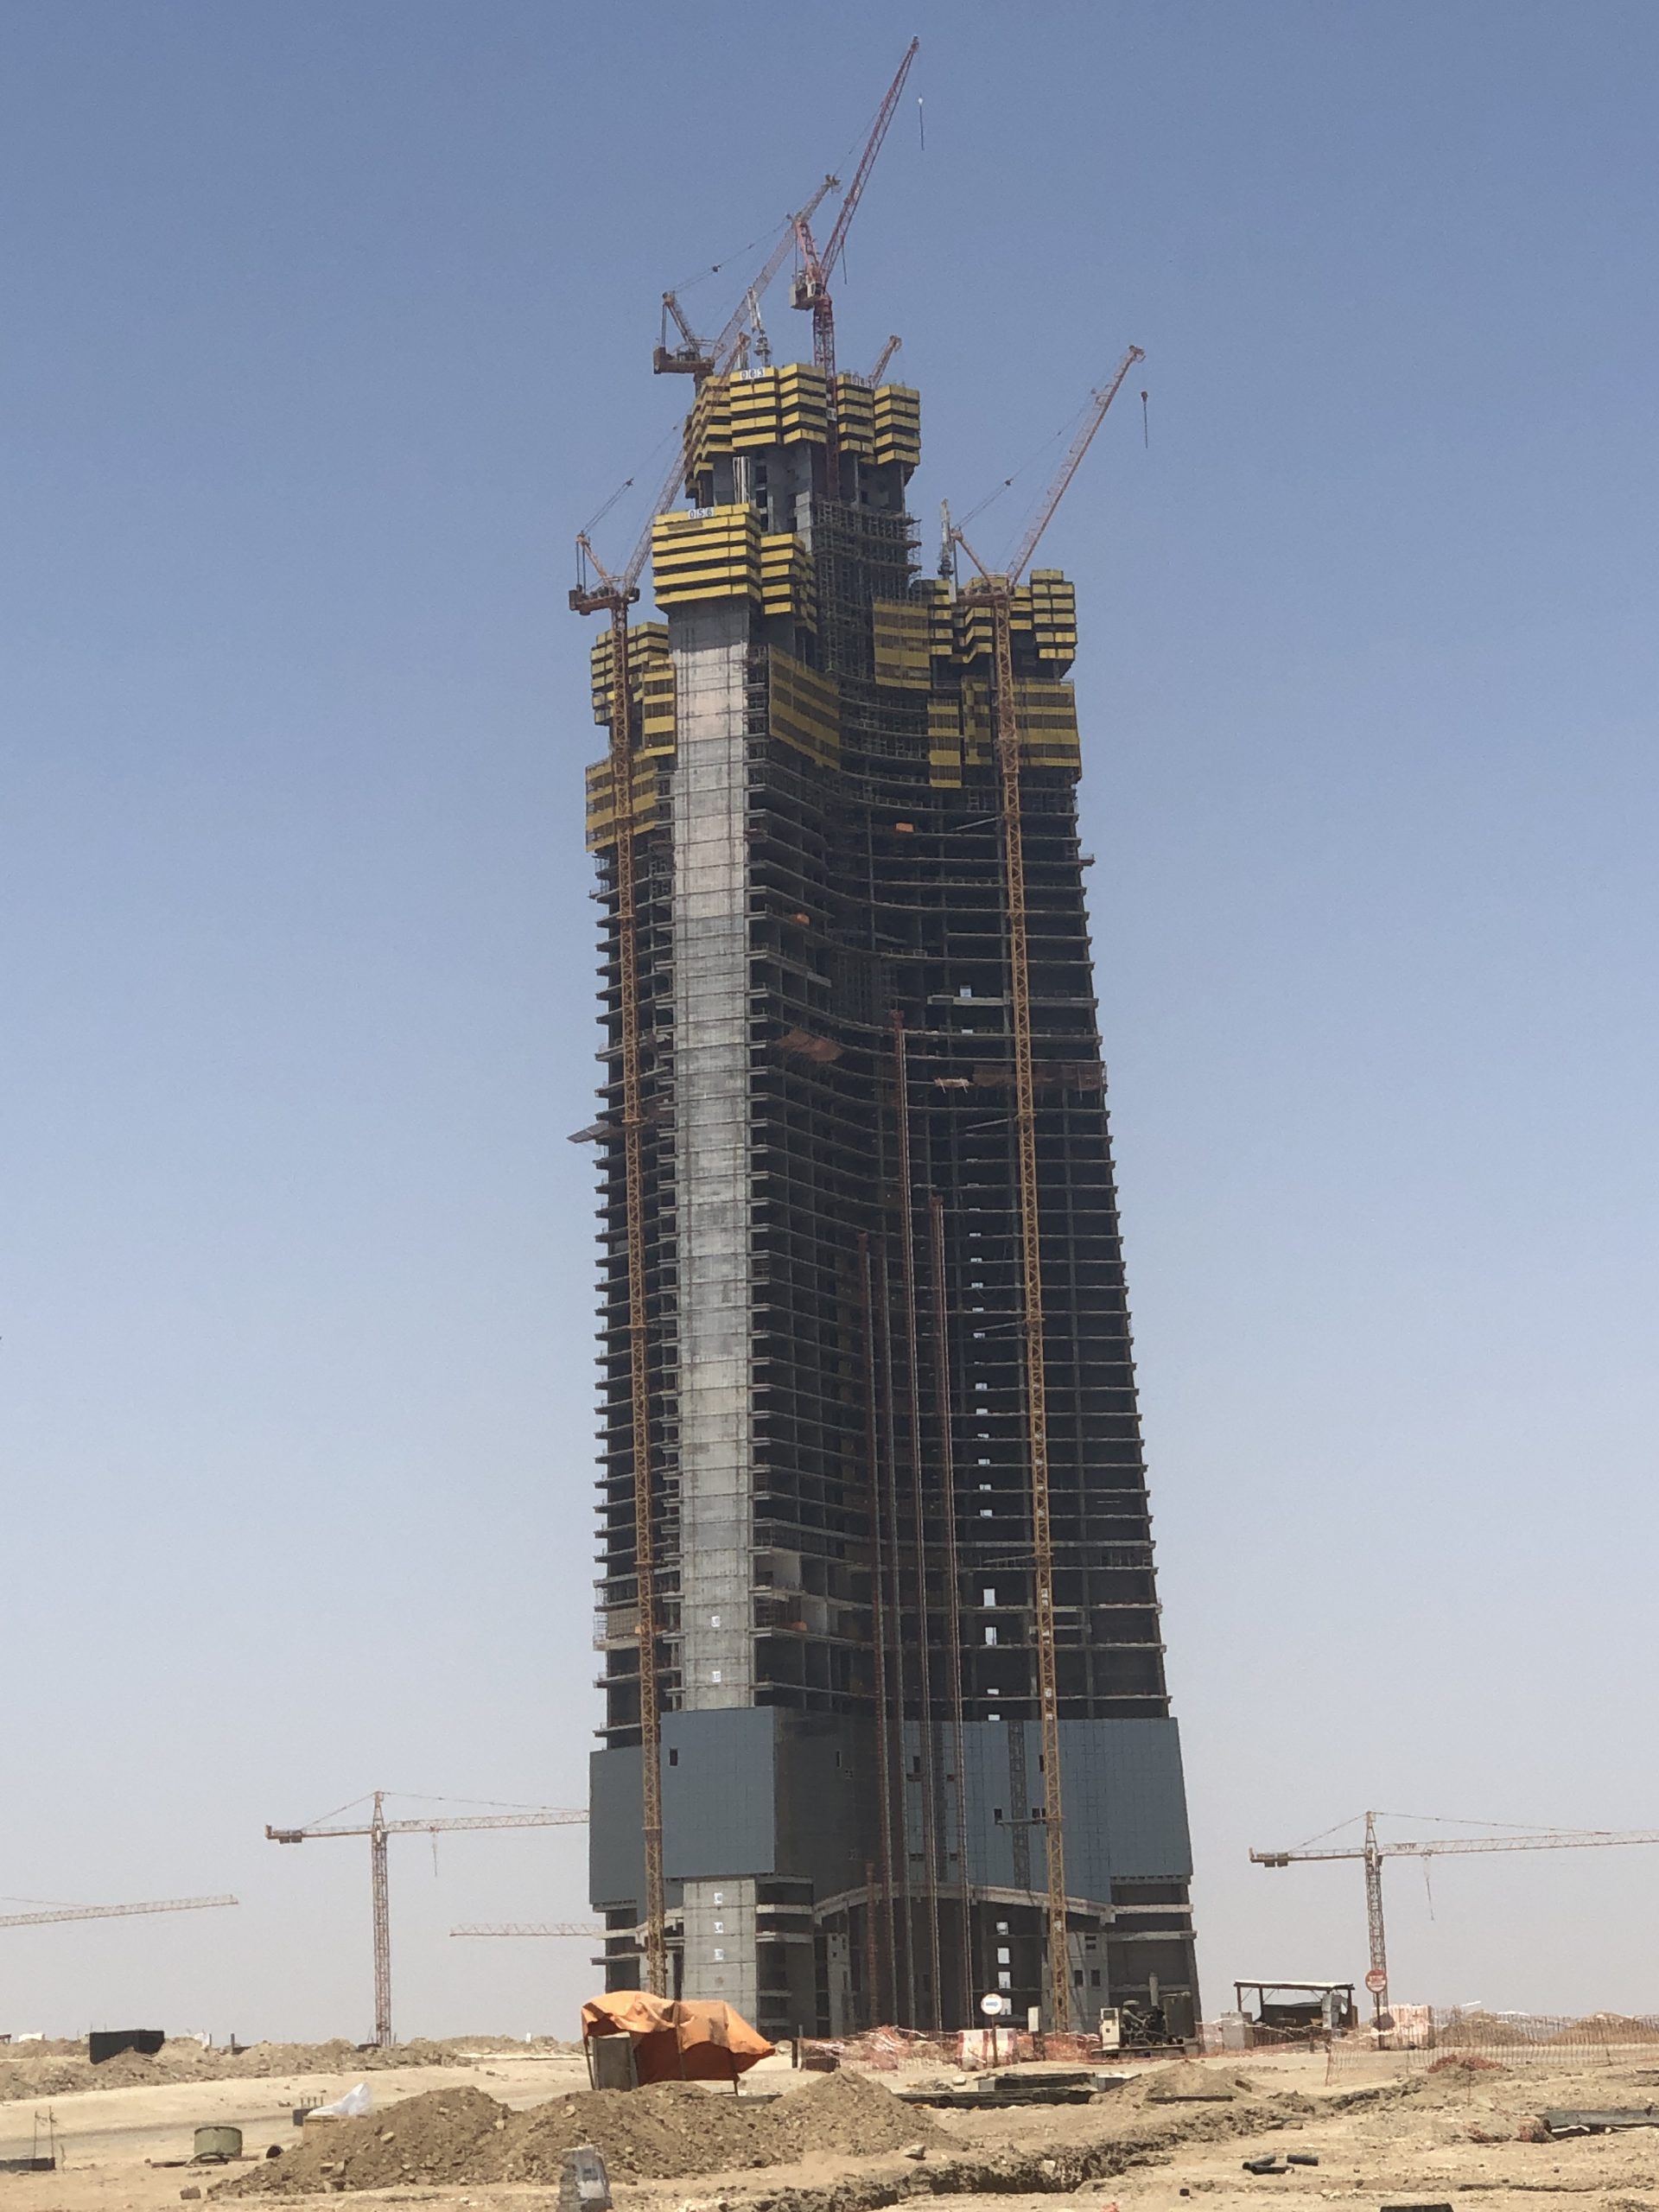 Jeddah_Tower_August_2019_S.Nitzold